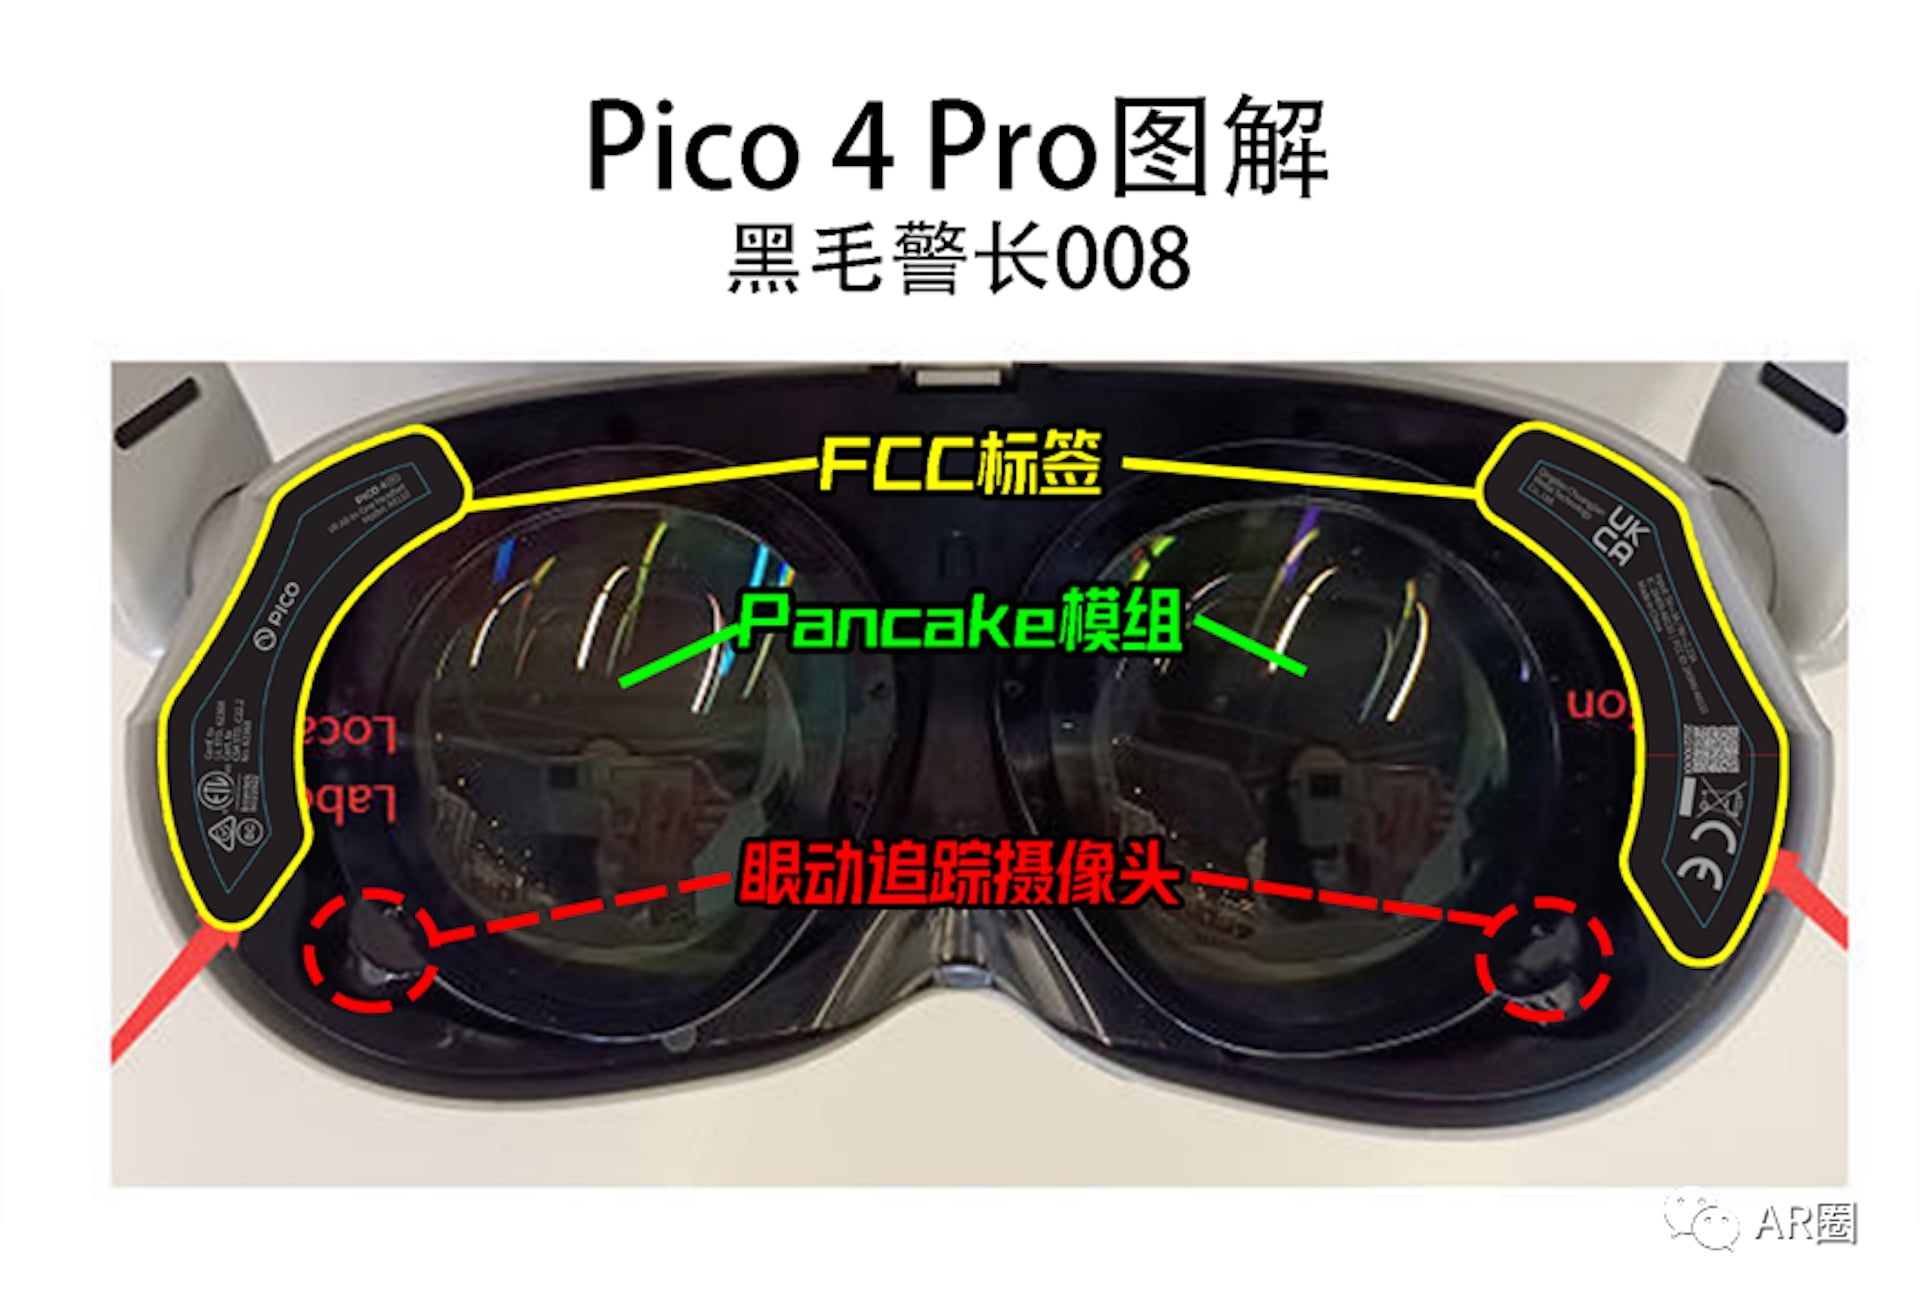 Pico Neo 4 (Pro): Launch in September, aggressive pricing - report